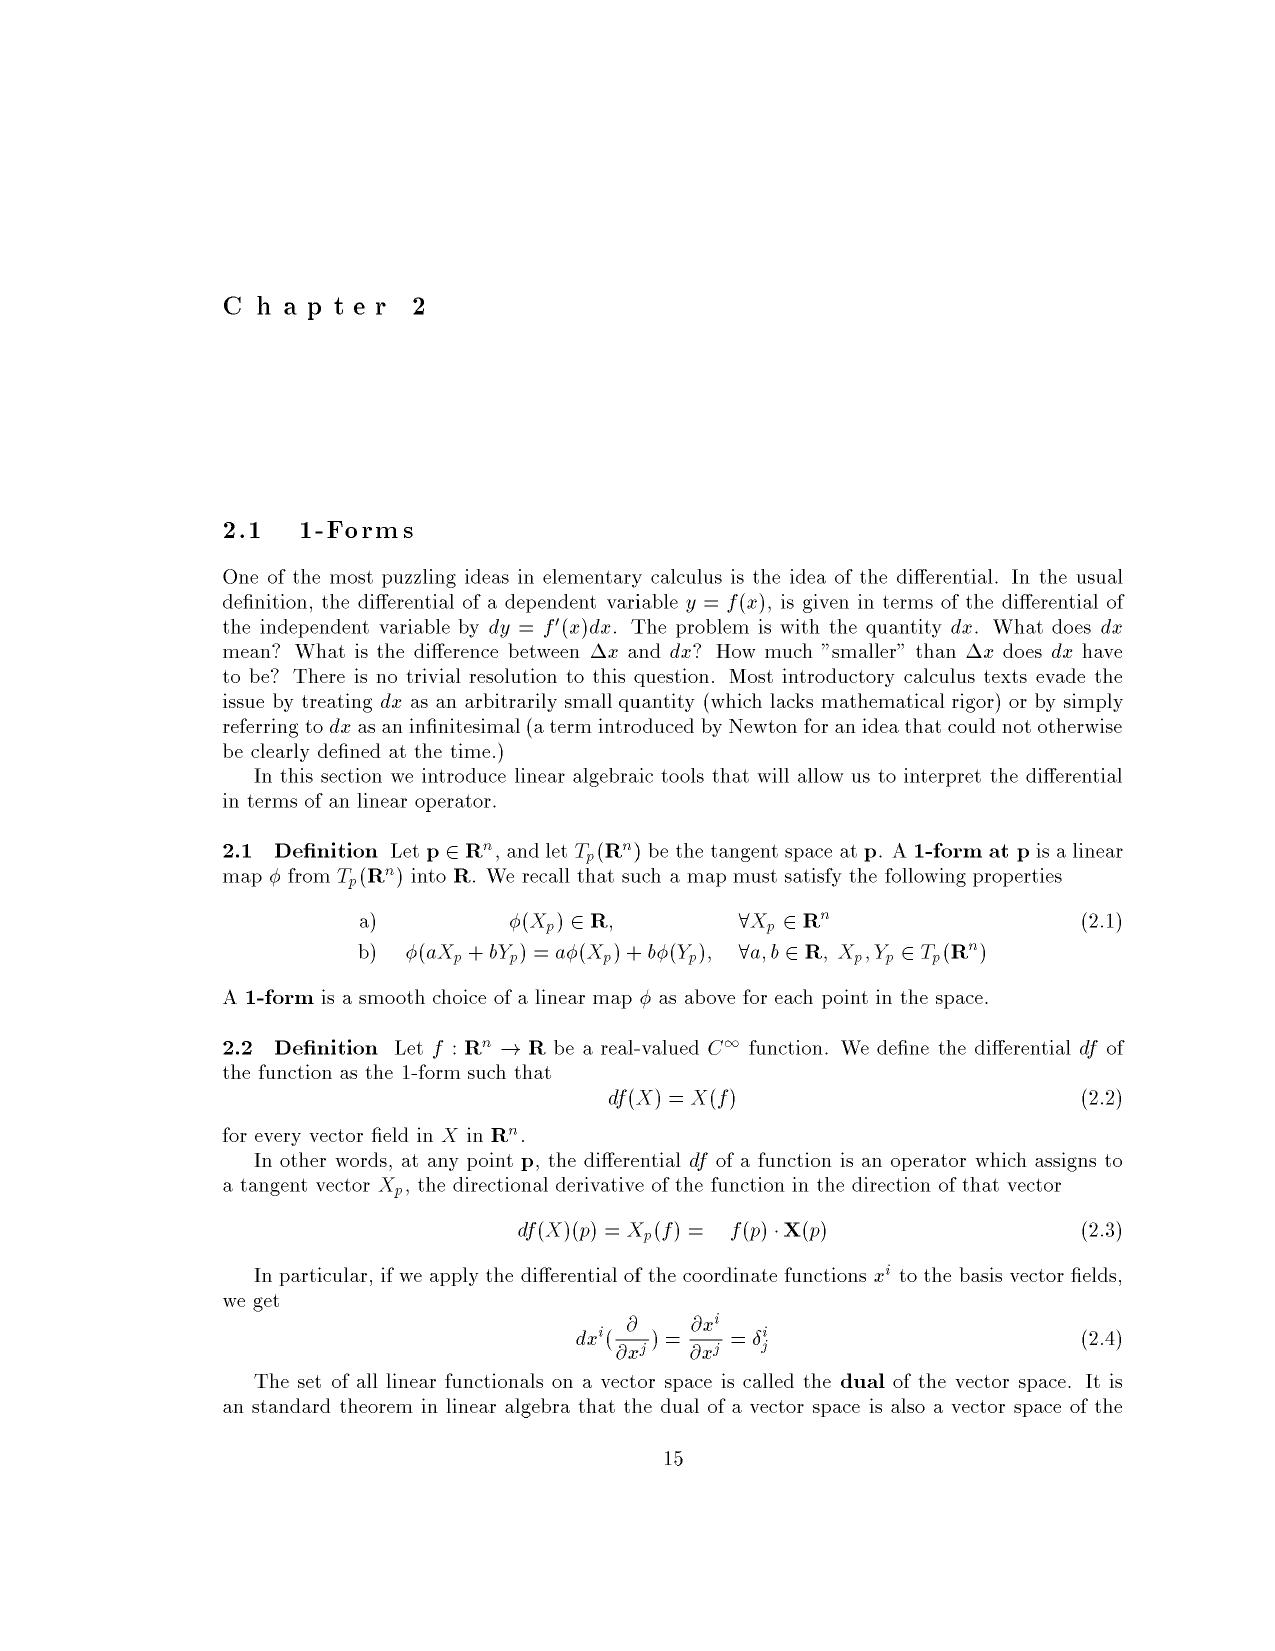 Differential Geometry in Physics 2 by Gabriel Lugo